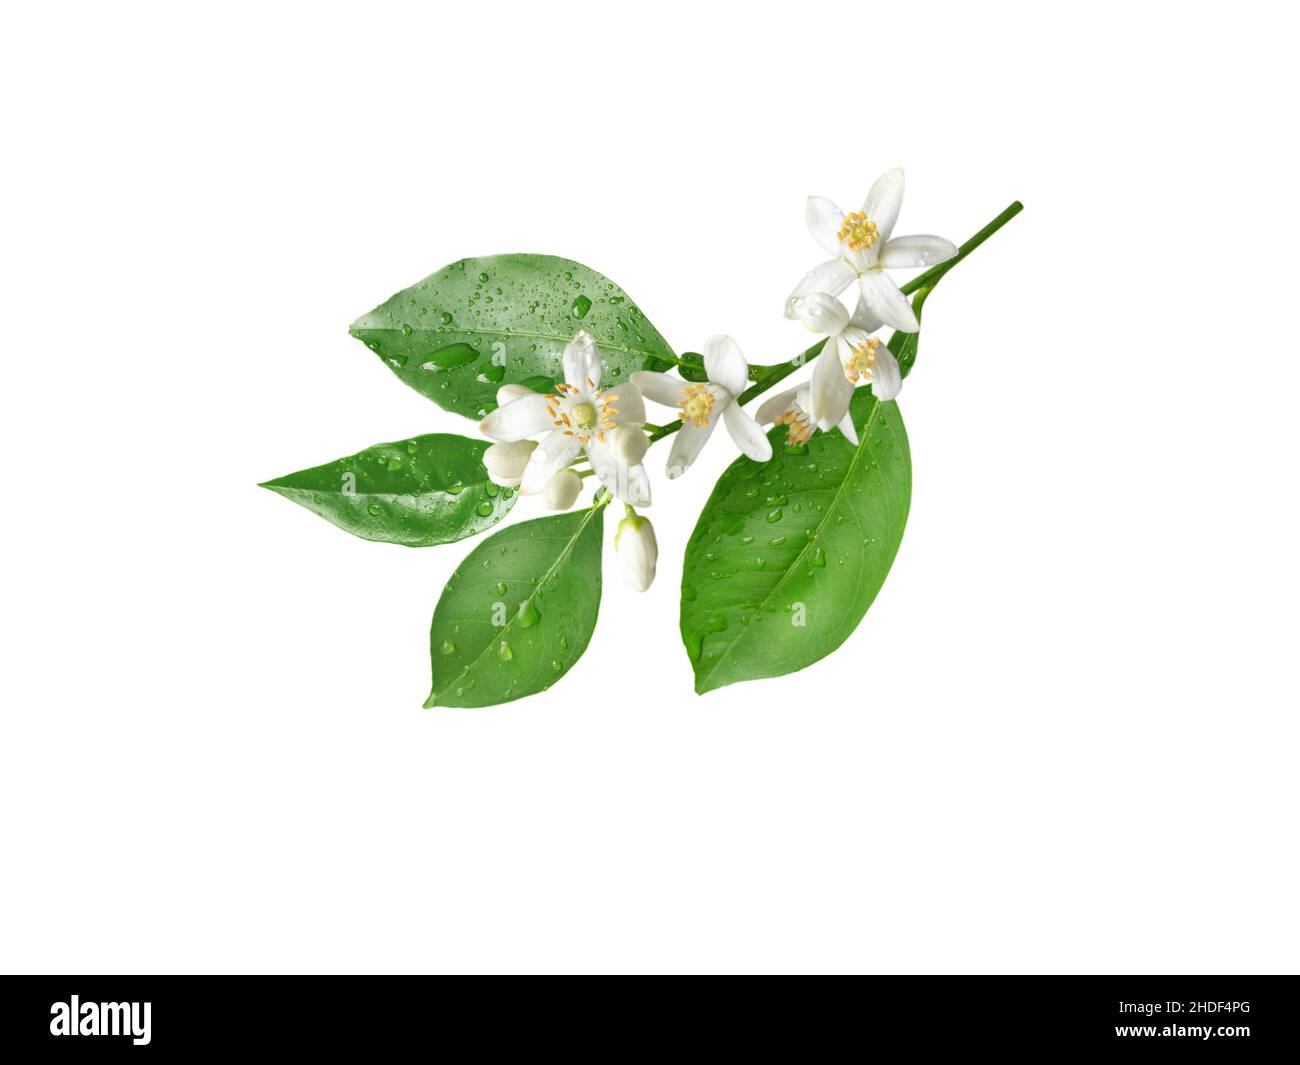 Orange tree branch with flowers and rain drops isolated on white. Neroli blossom. Citrus bloom. Stock Photo